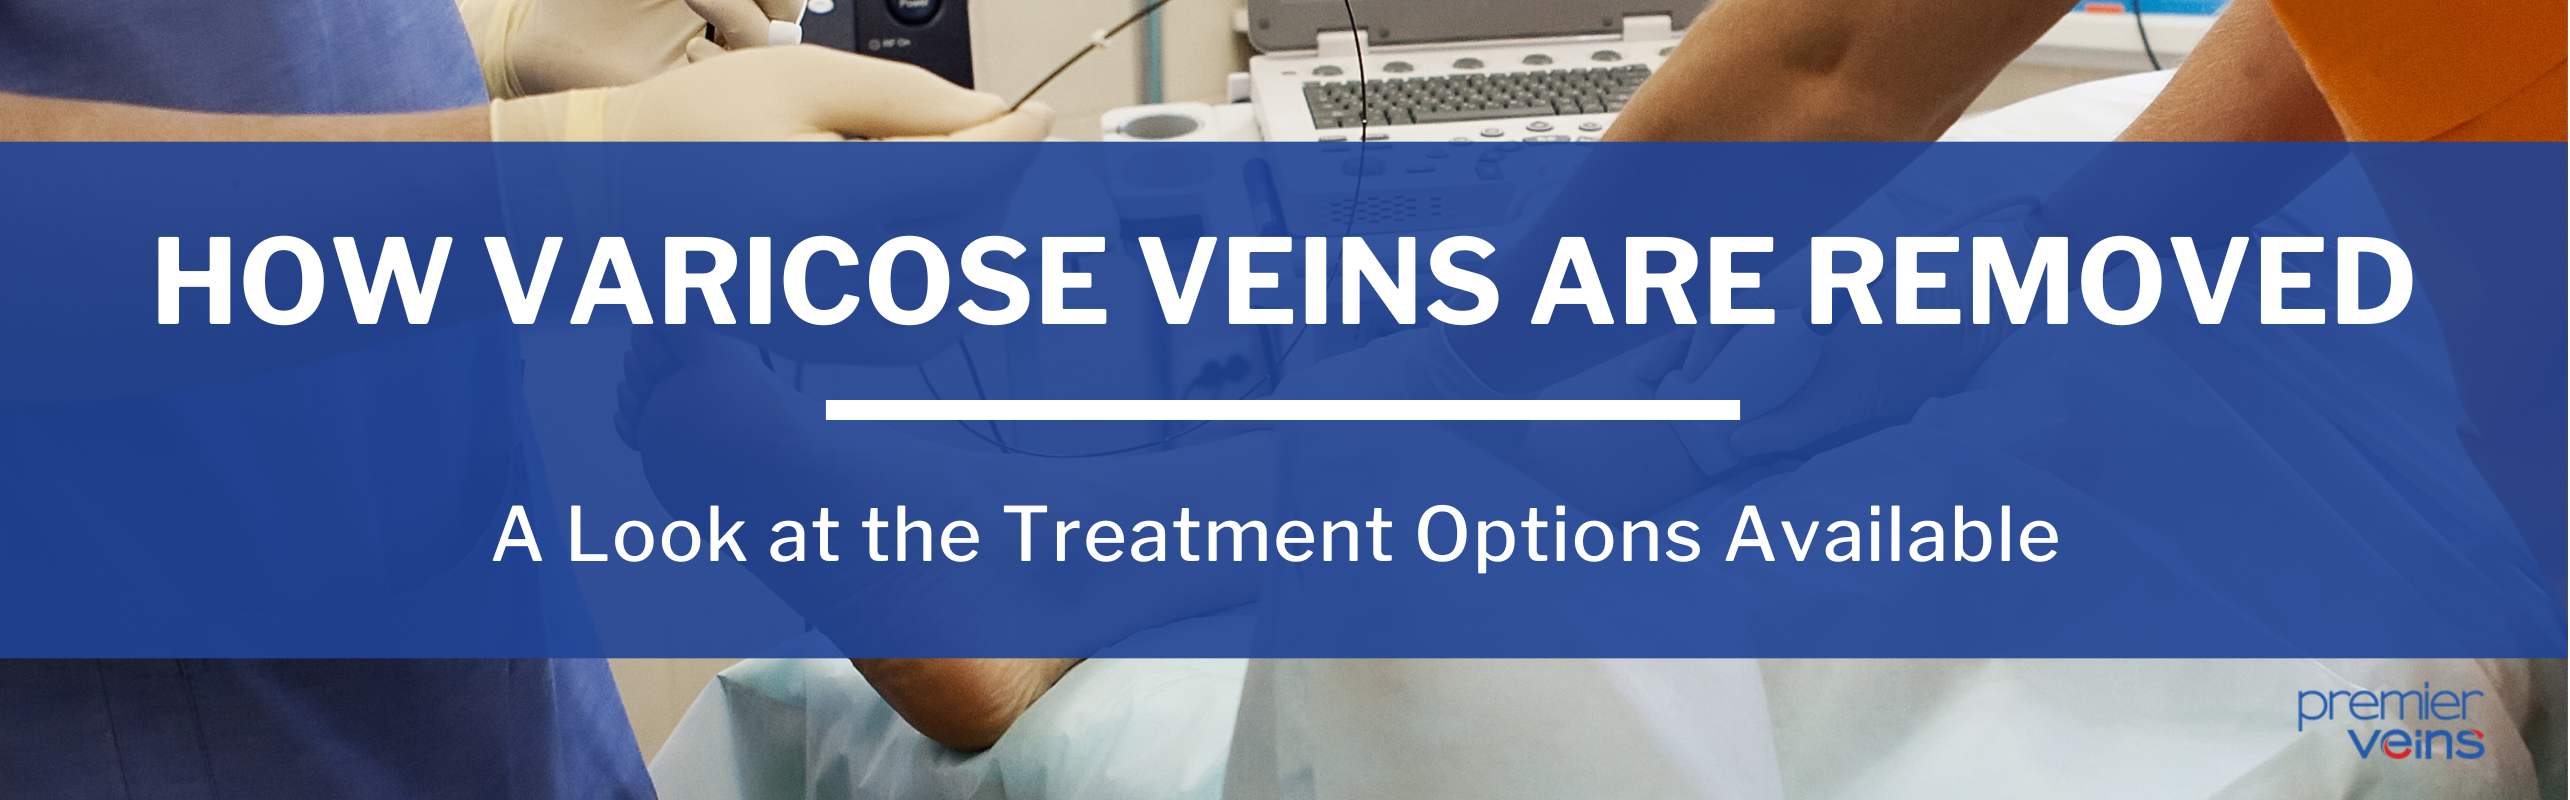 How Varicose Veins Are Removed